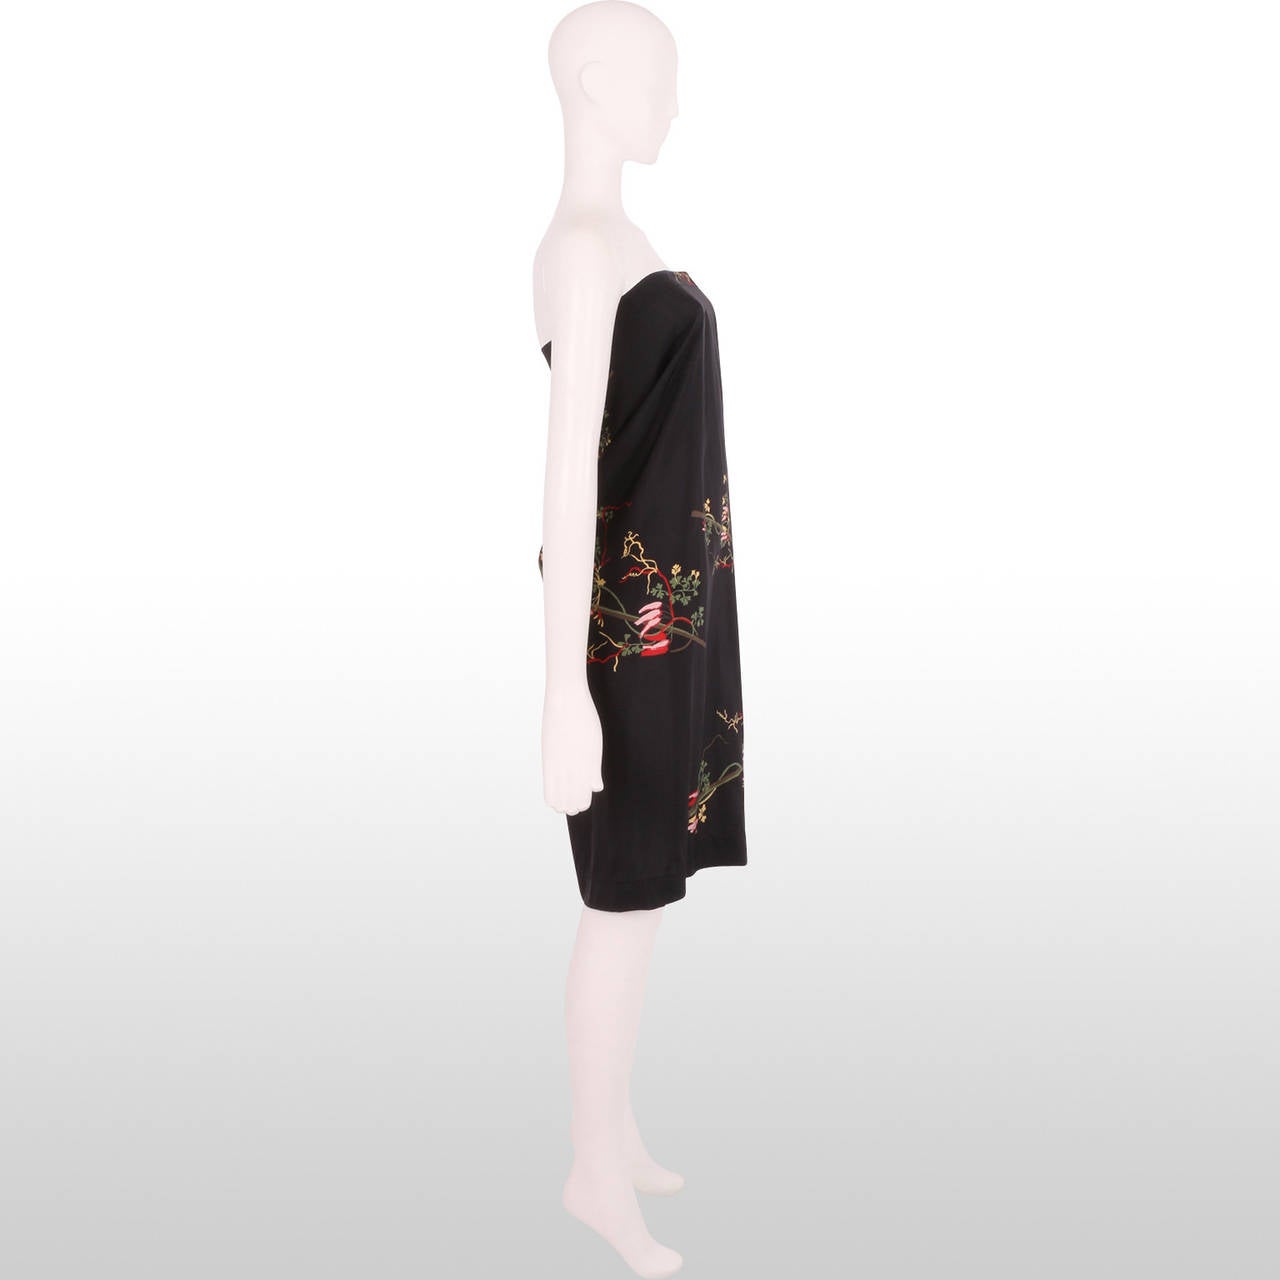 Vivienne Westwood Anglomania Black with Oriental Print Strapless Dress In Excellent Condition For Sale In London, GB